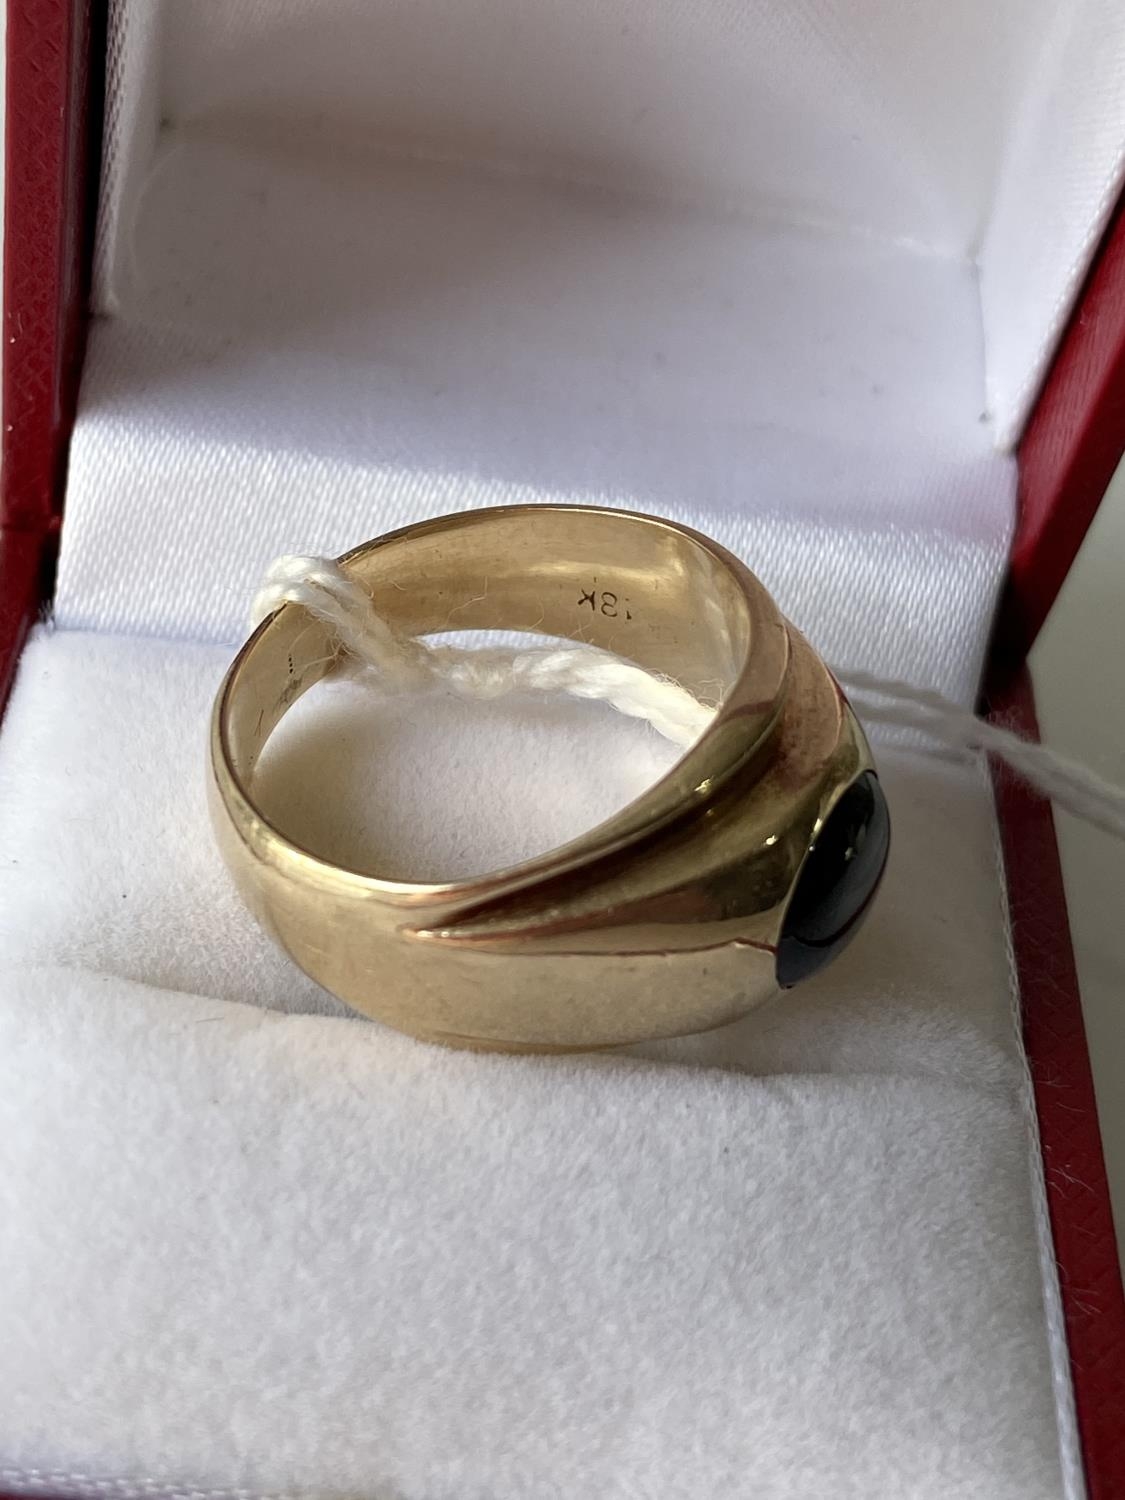 An 18ct gold gents ring set with a single star sapphire/ Cats eye style stone. [size 0] [9.86g] - Image 7 of 8